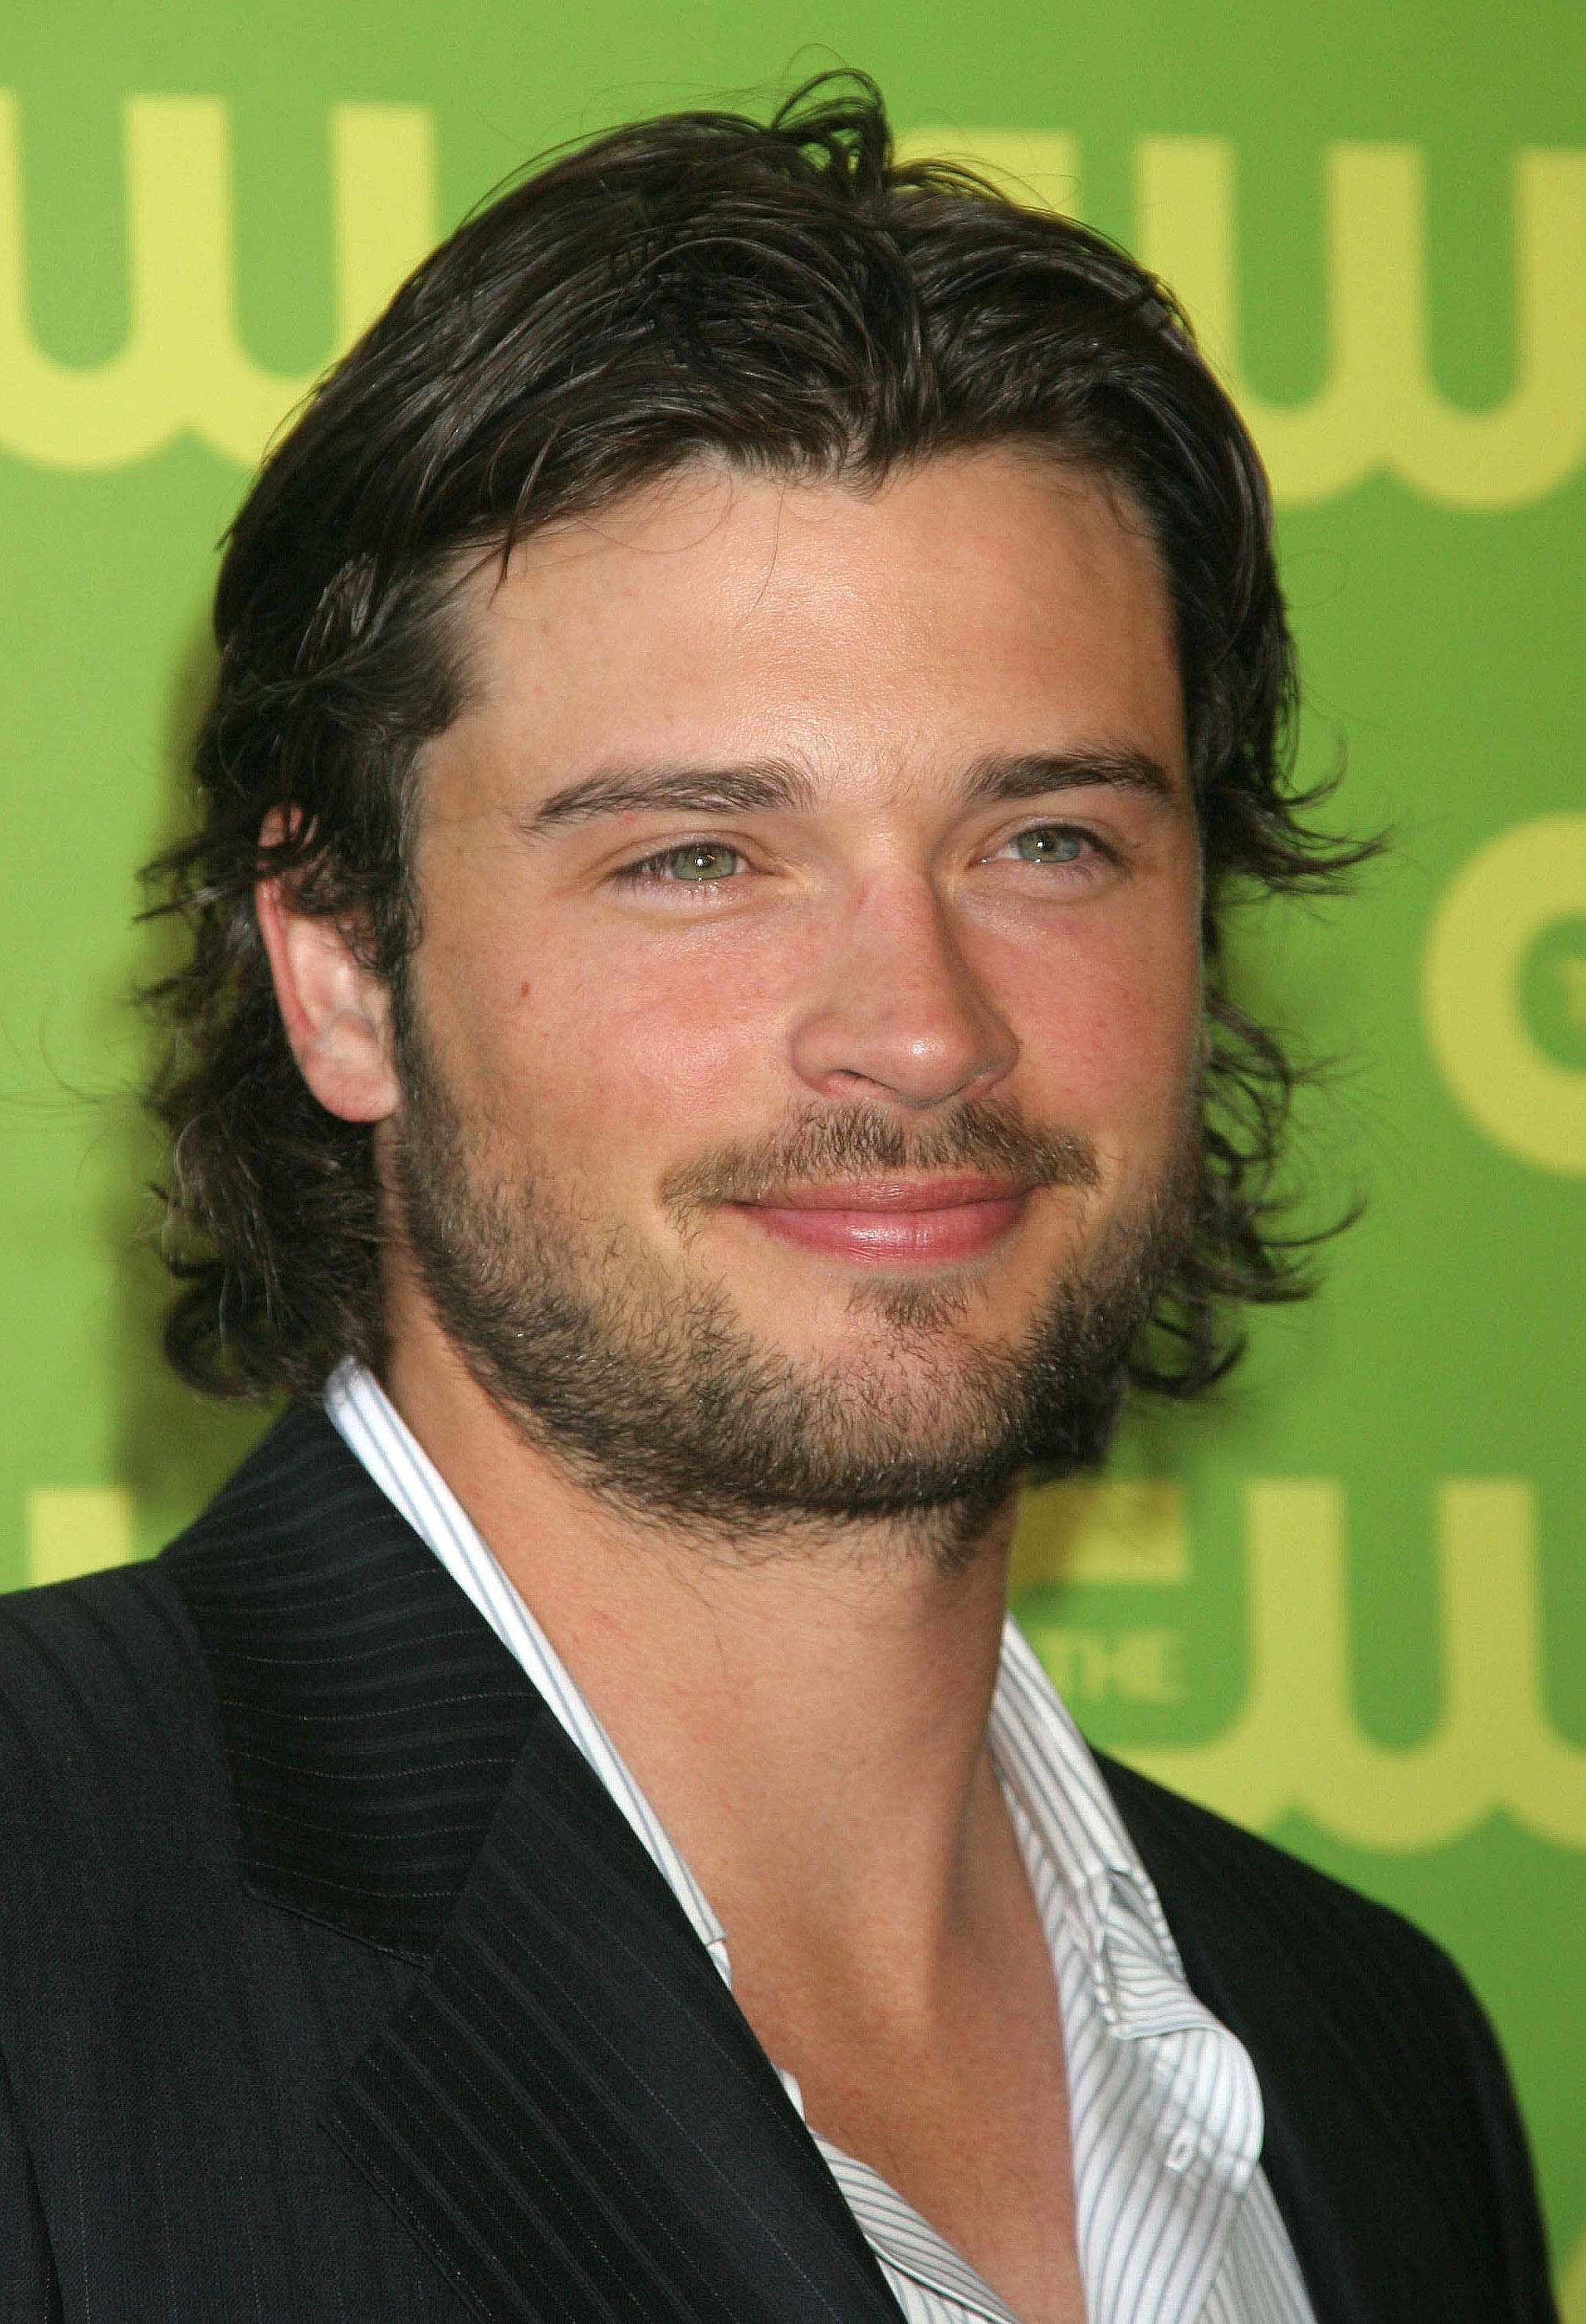 Tom Welling at CW Upfronts in 2006